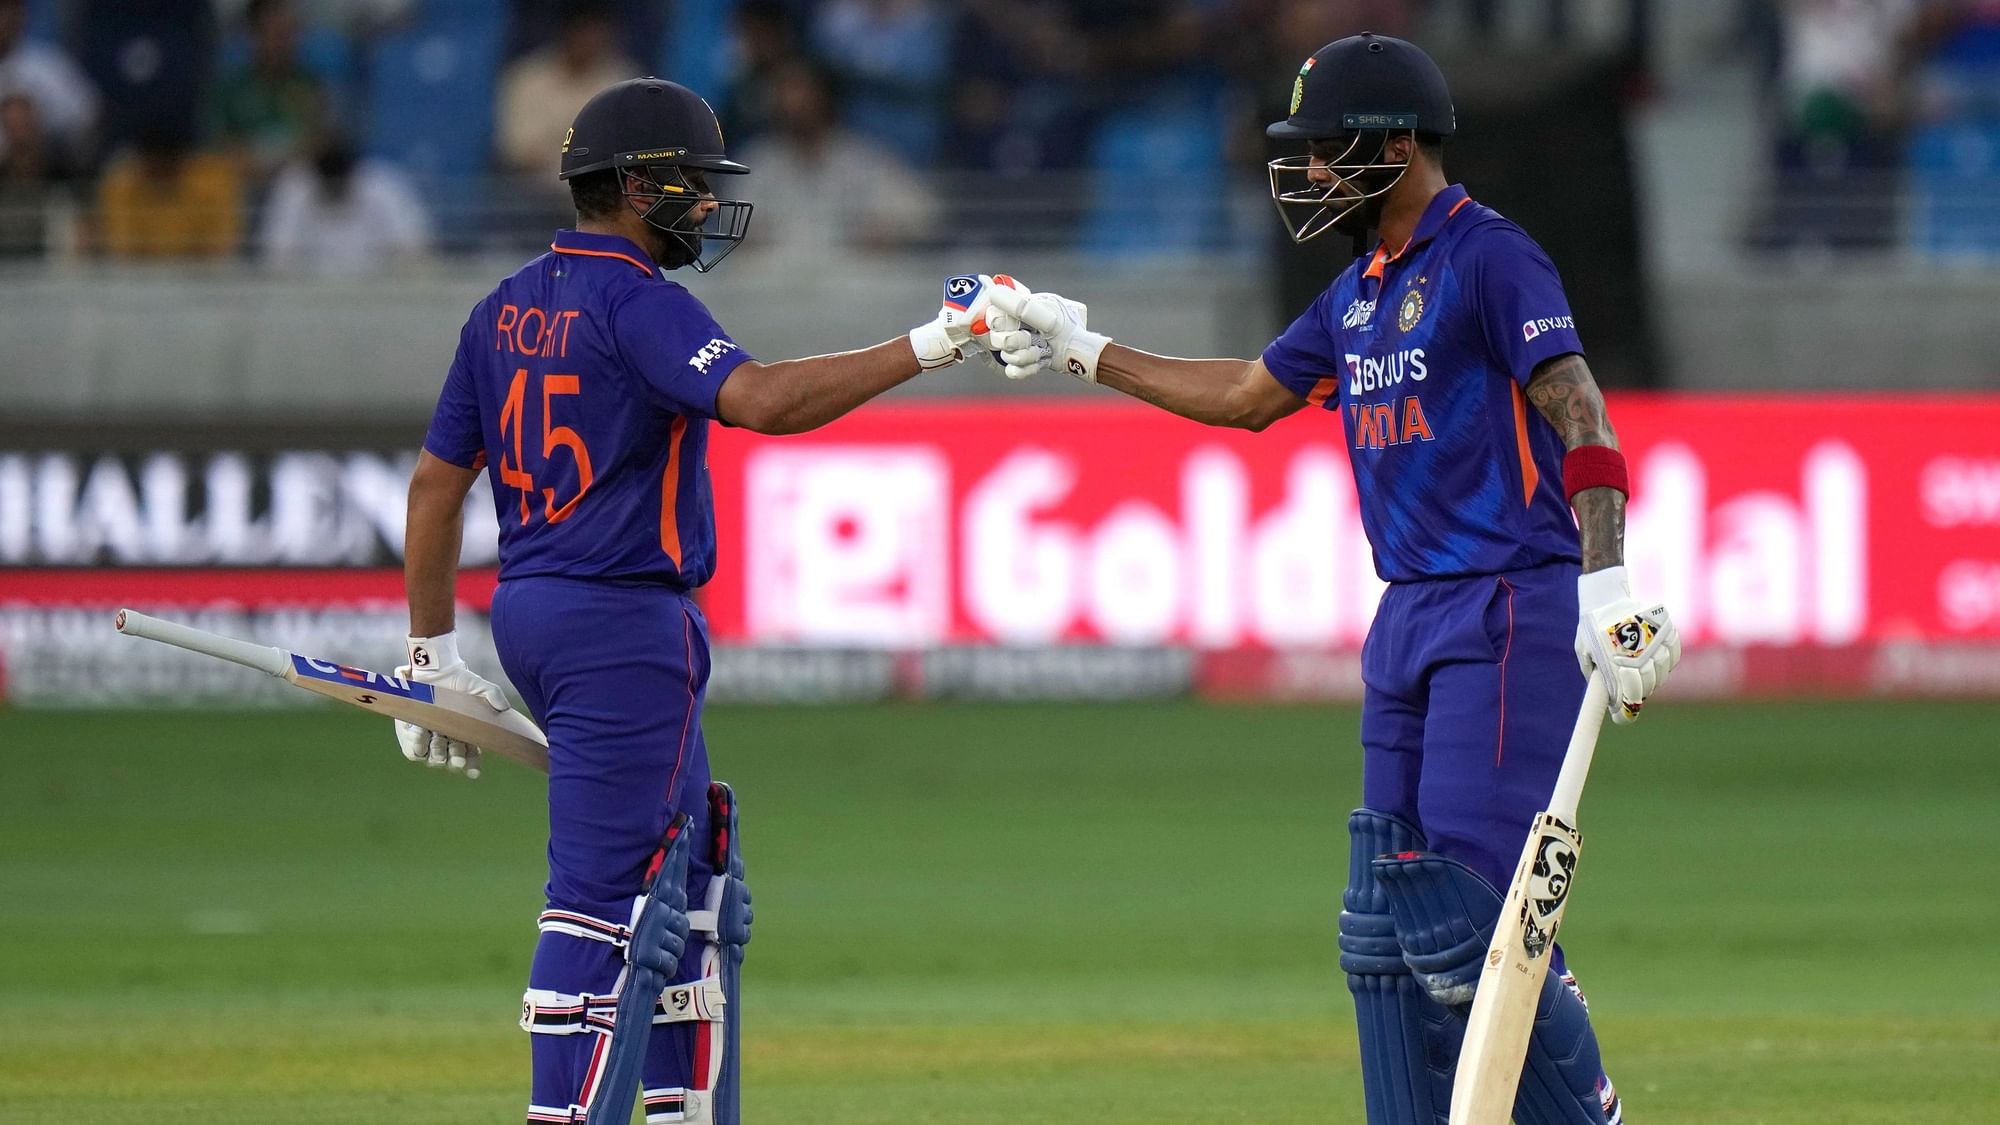 India Vs Sri Lanka Live Streaming When and Where To Watch IND vs SL Asia Cup 2022 Live Cricket Score on TV and Online?